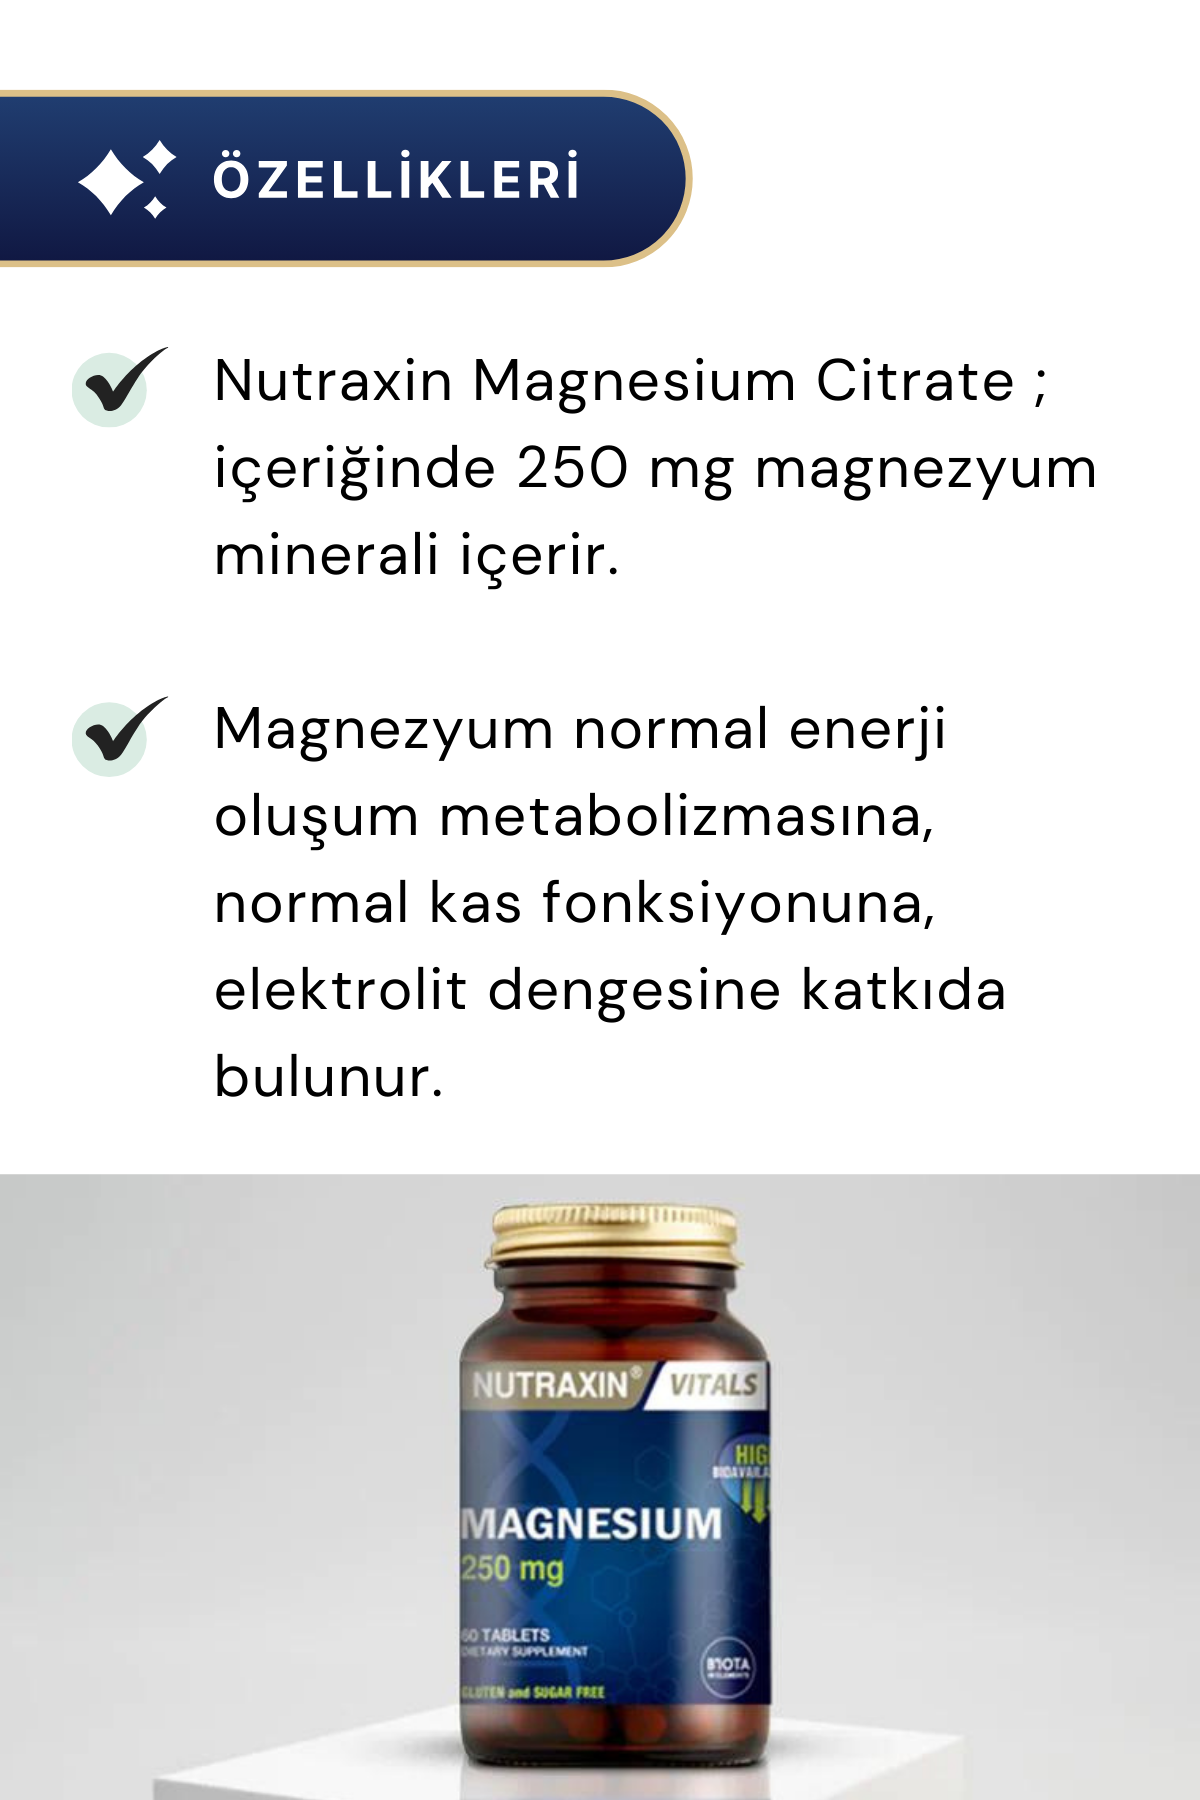 Nutraxin Magnesium Citrate 250 mg 60 Tablet 6'lı Paket